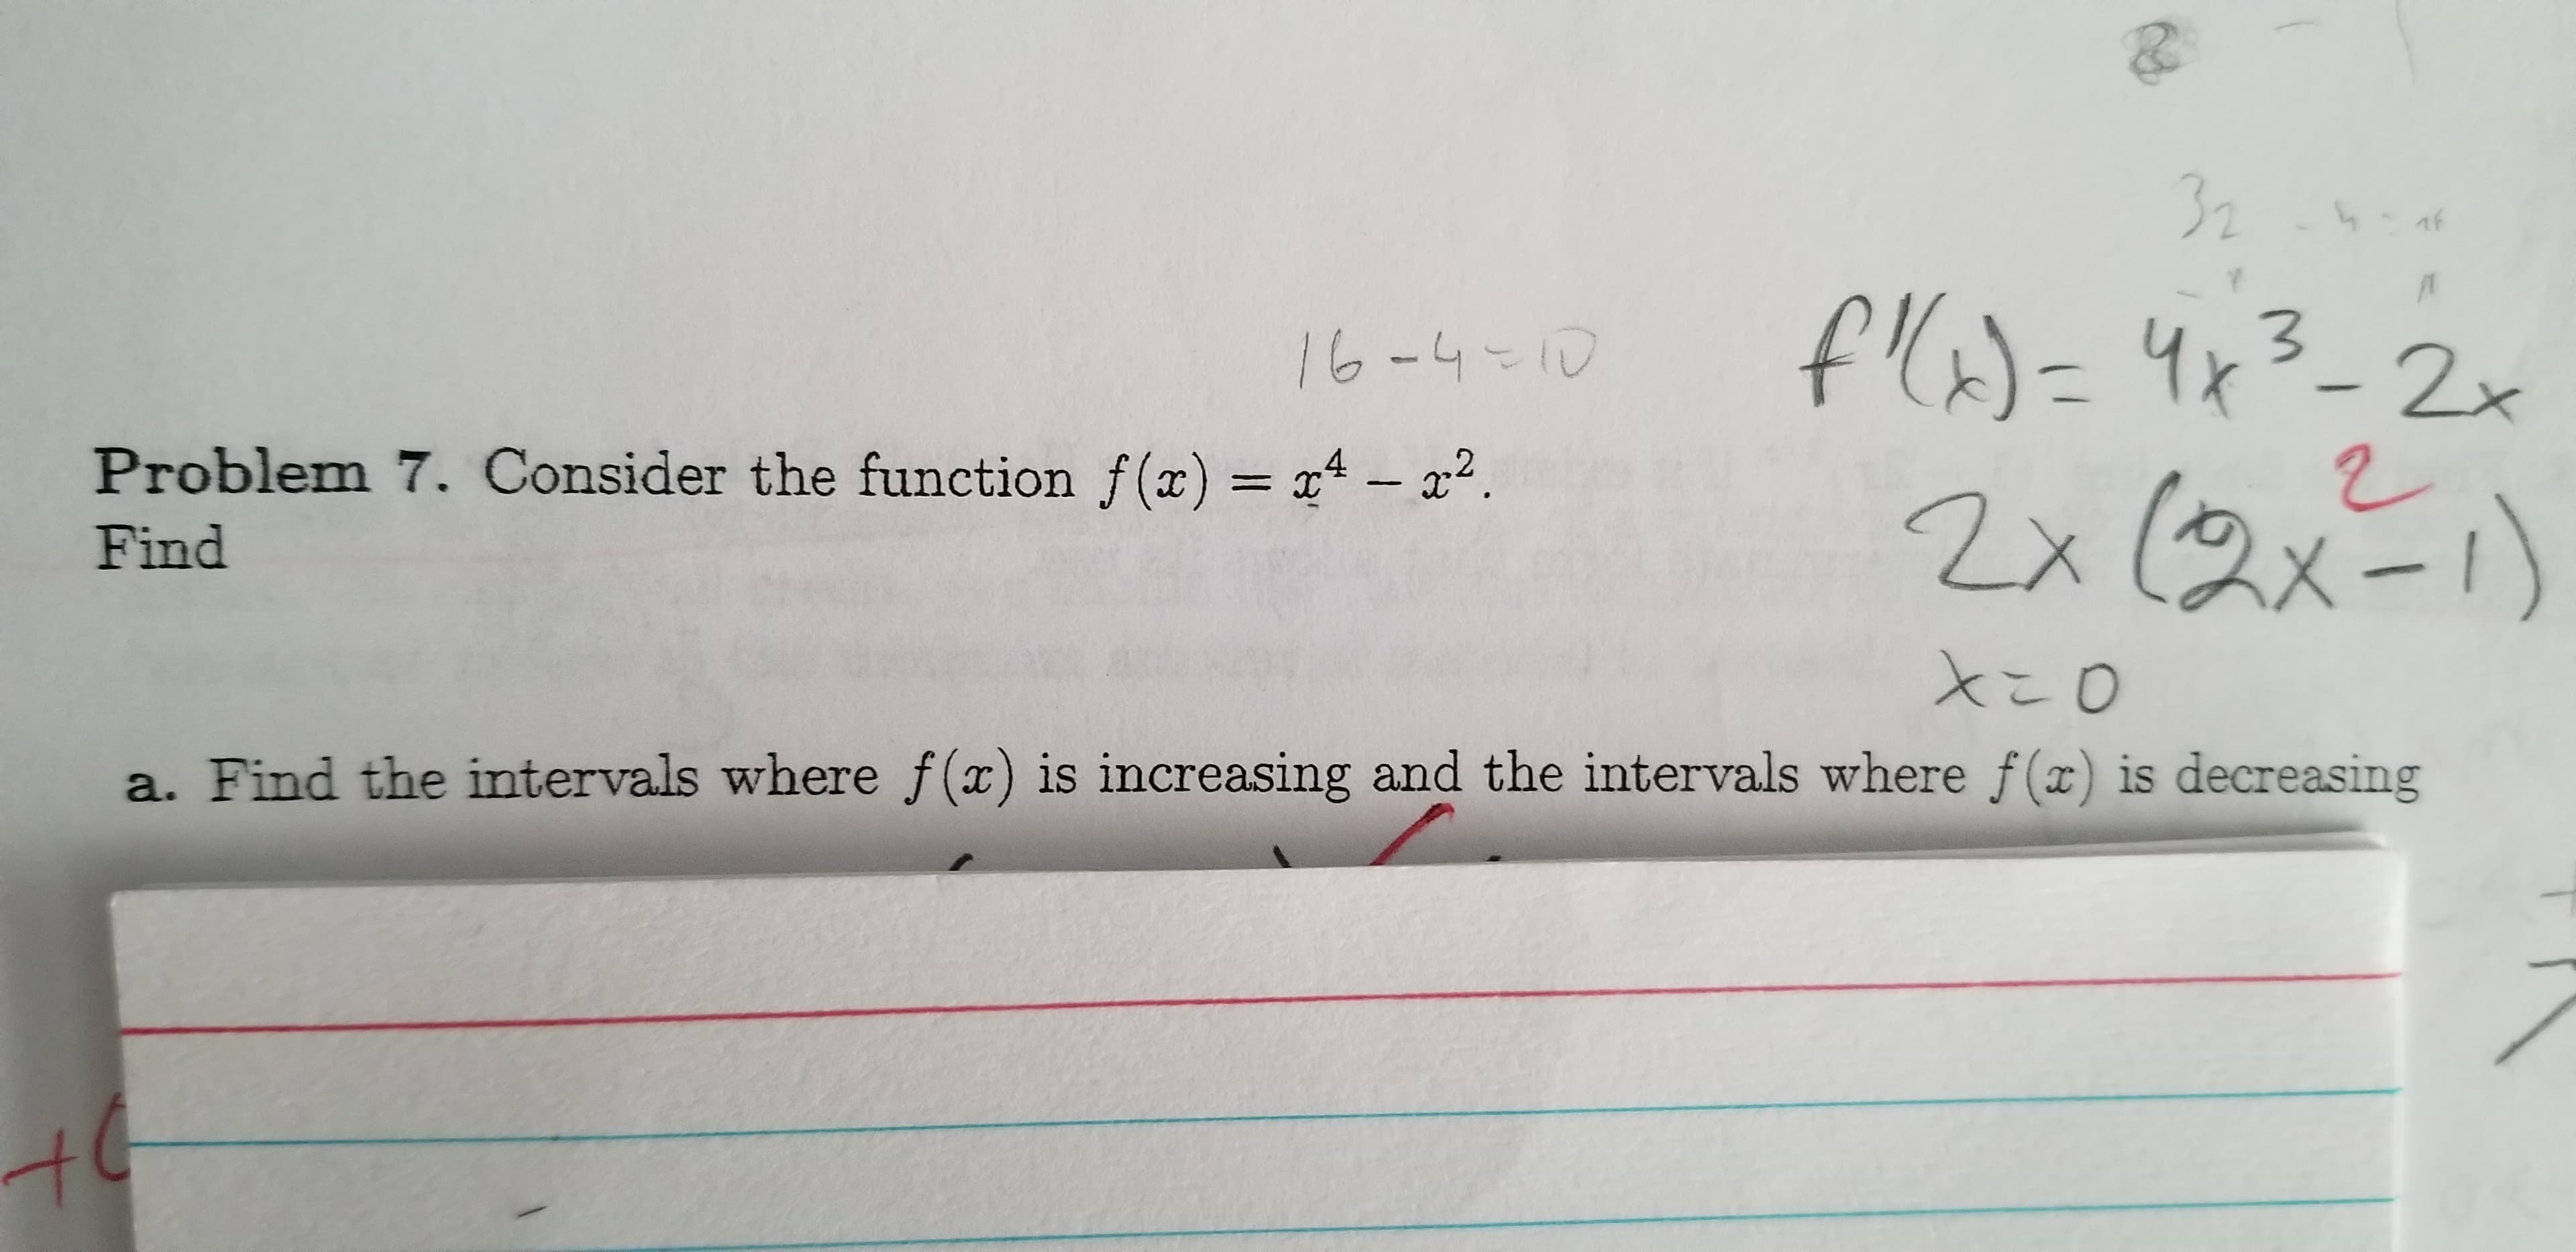 32
f()=4x
f(=4x3-2x
16-4-10
Problem 7. Consider the function f(x) = x4 - x2.
2x (2x=1)
Find
a. Find the intervals where f(x) is increasing and the intervals where f(x) is decreasing
